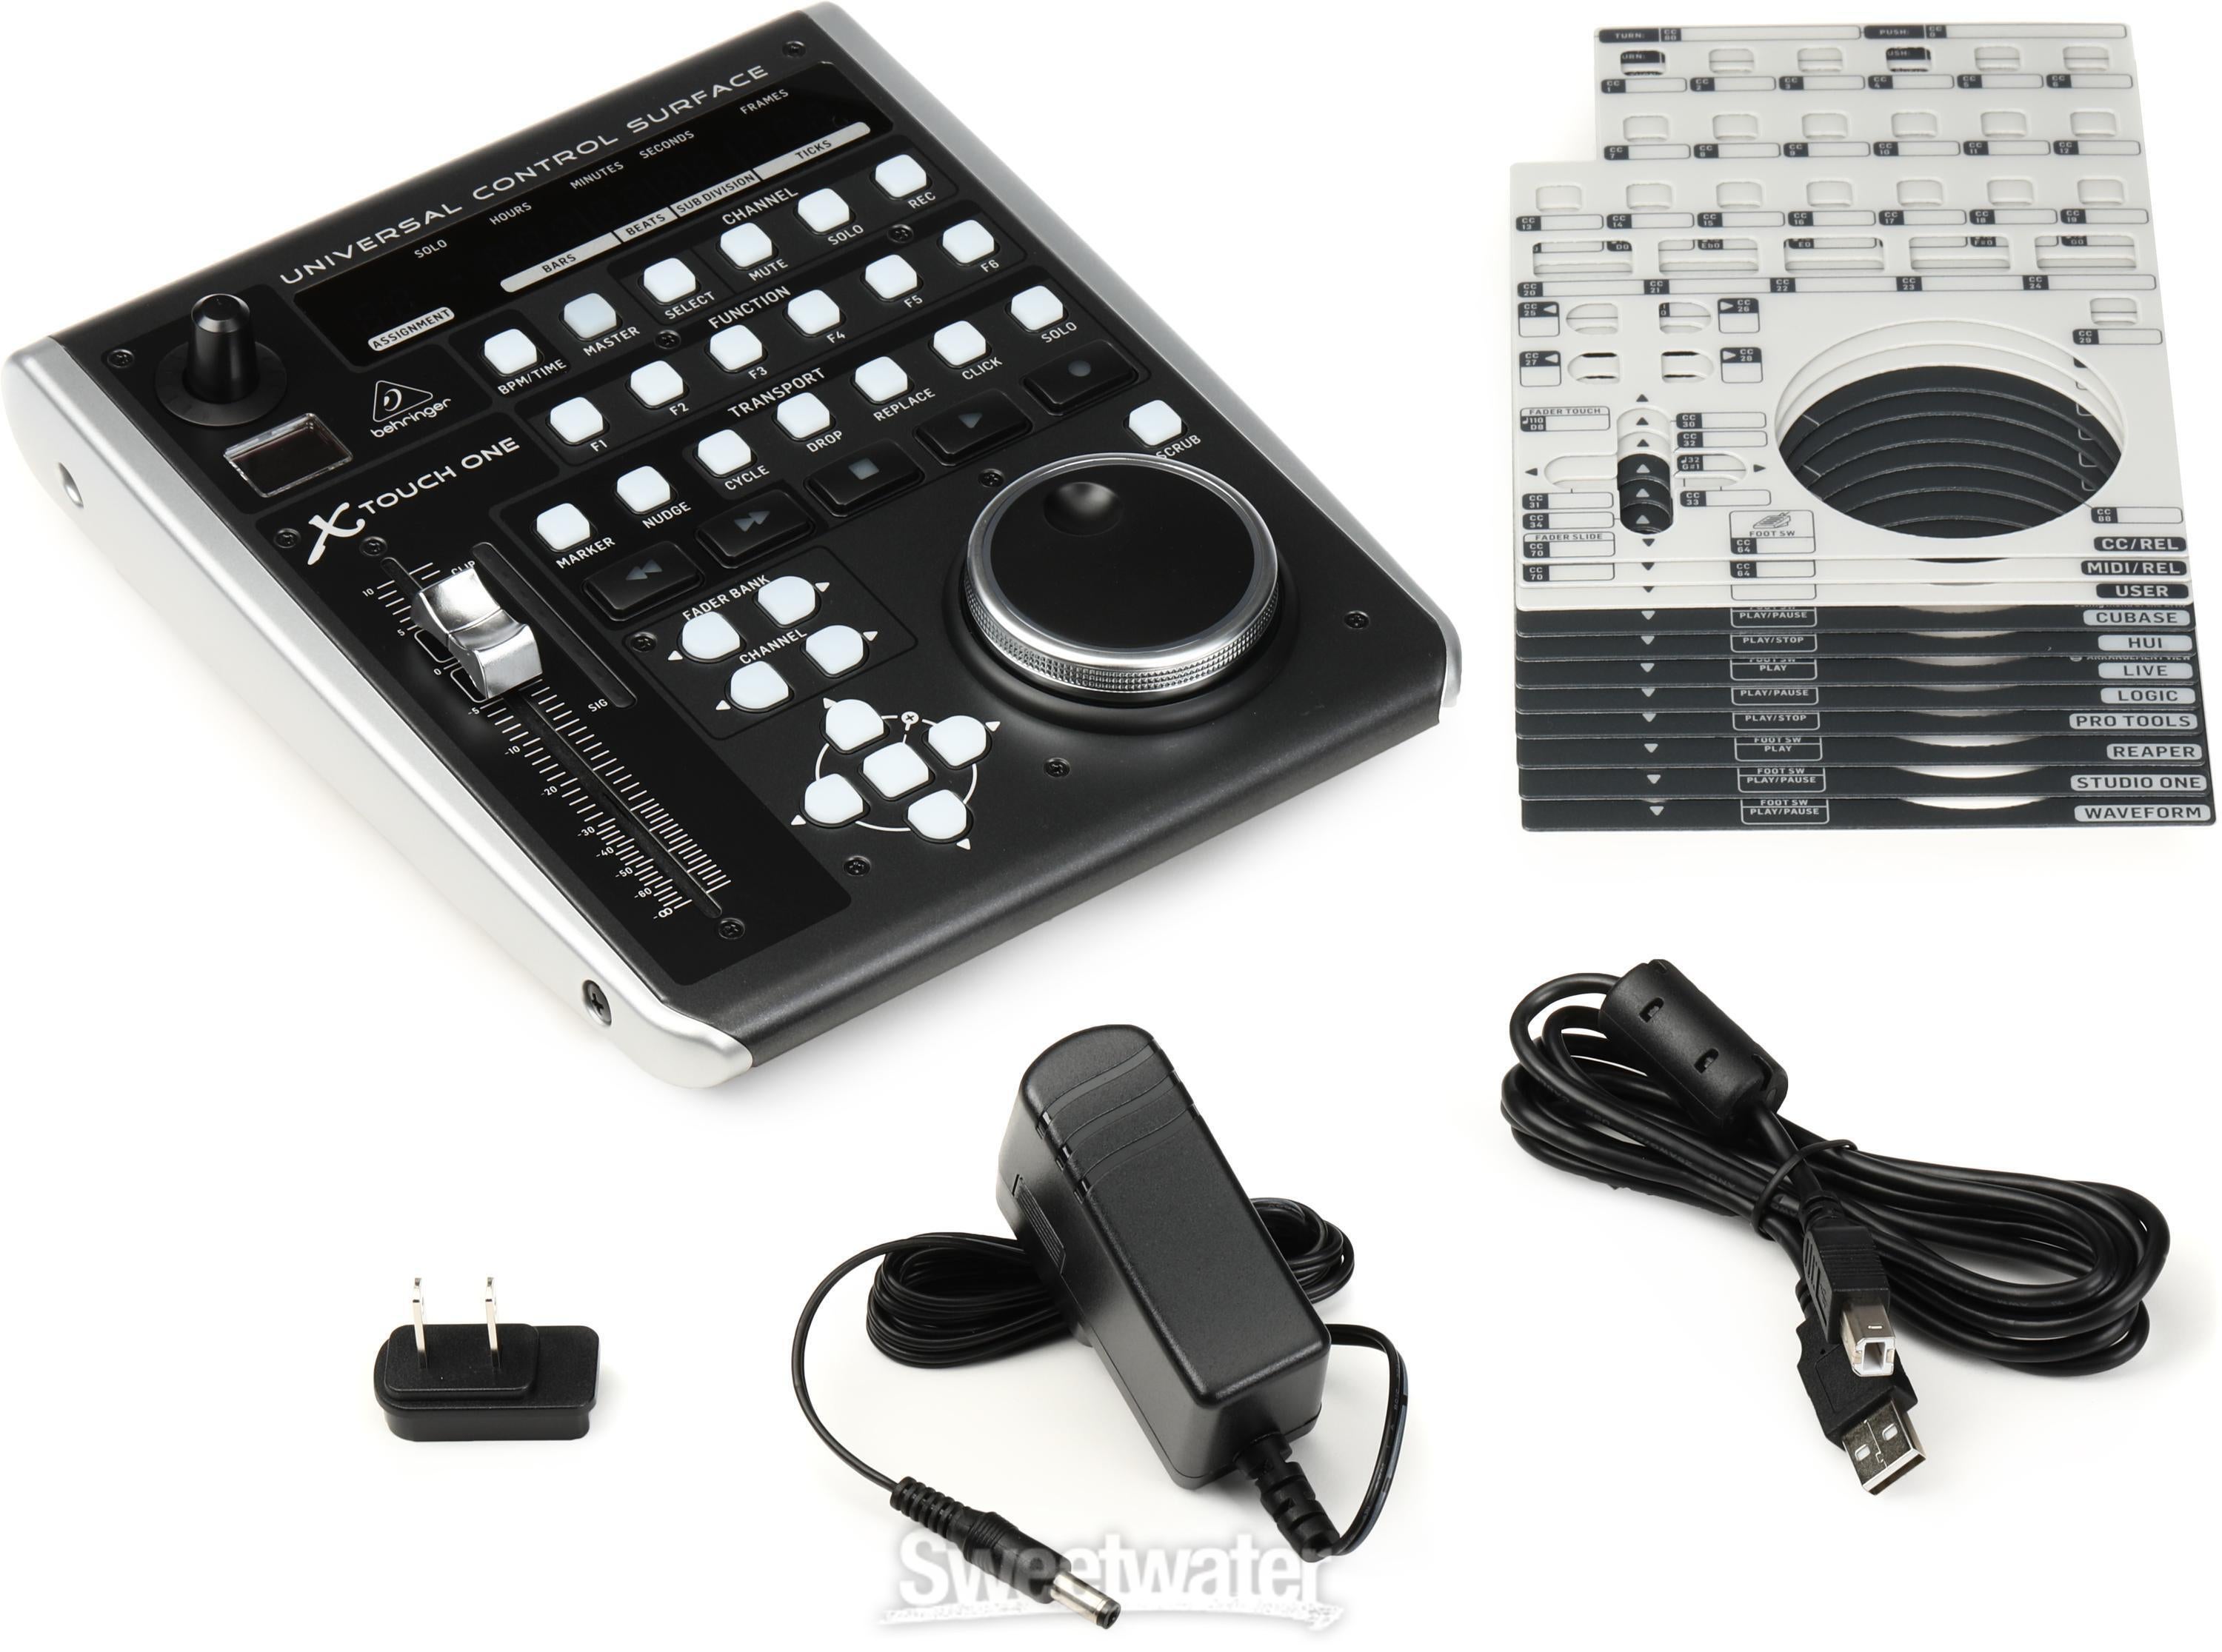 Behringer X-Touch One Universal Control Surface | Sweetwater